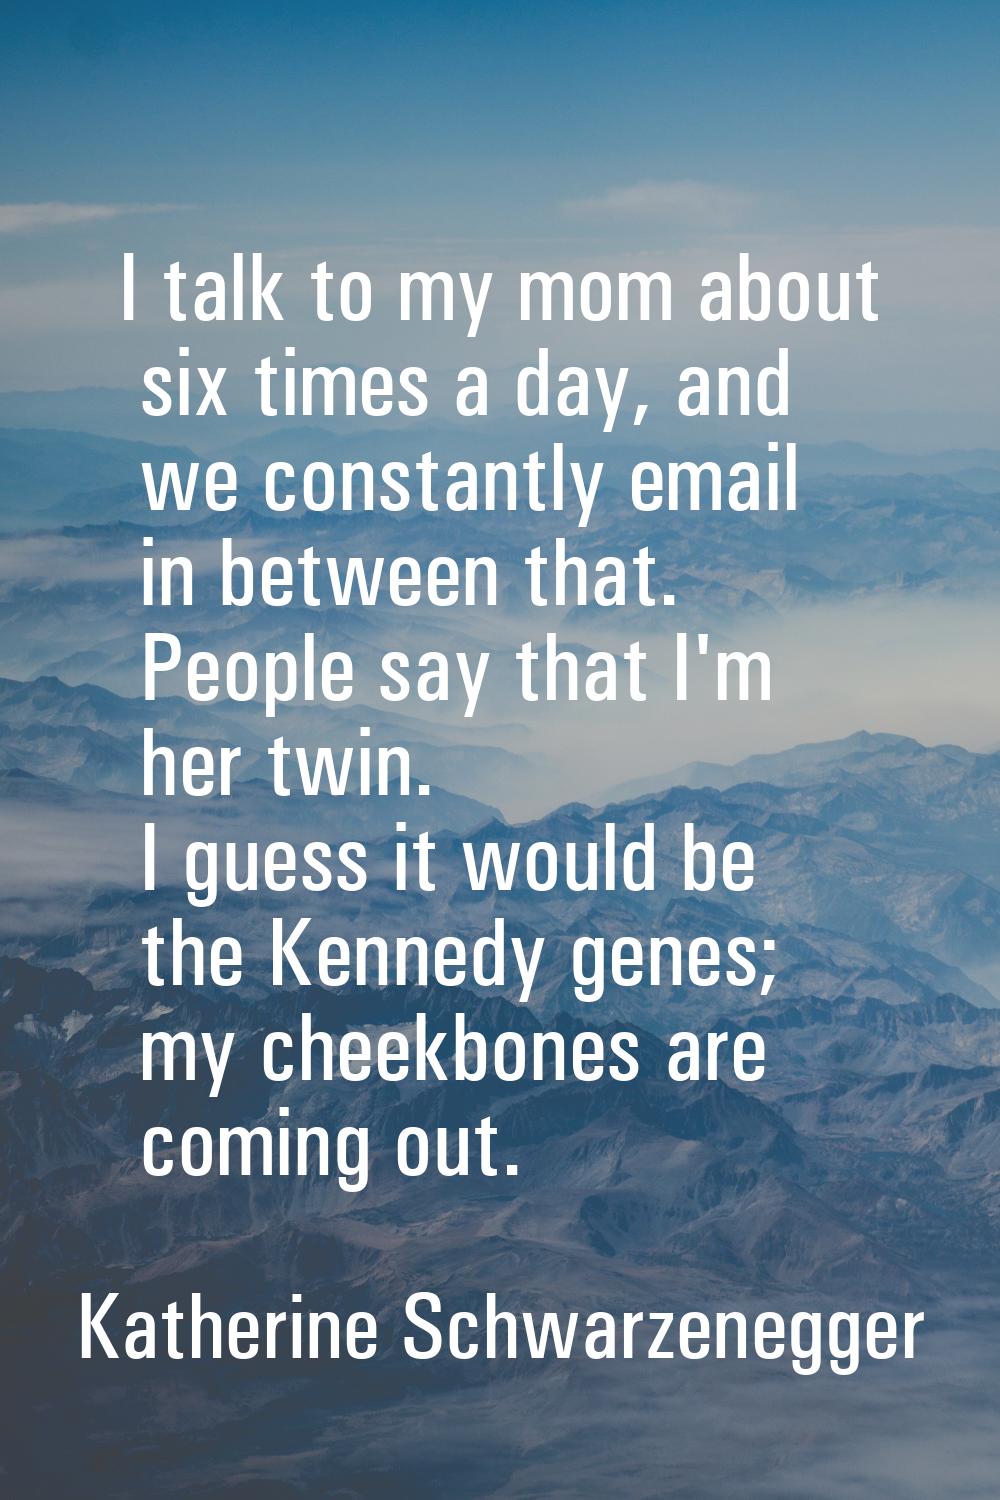 I talk to my mom about six times a day, and we constantly email in between that. People say that I'